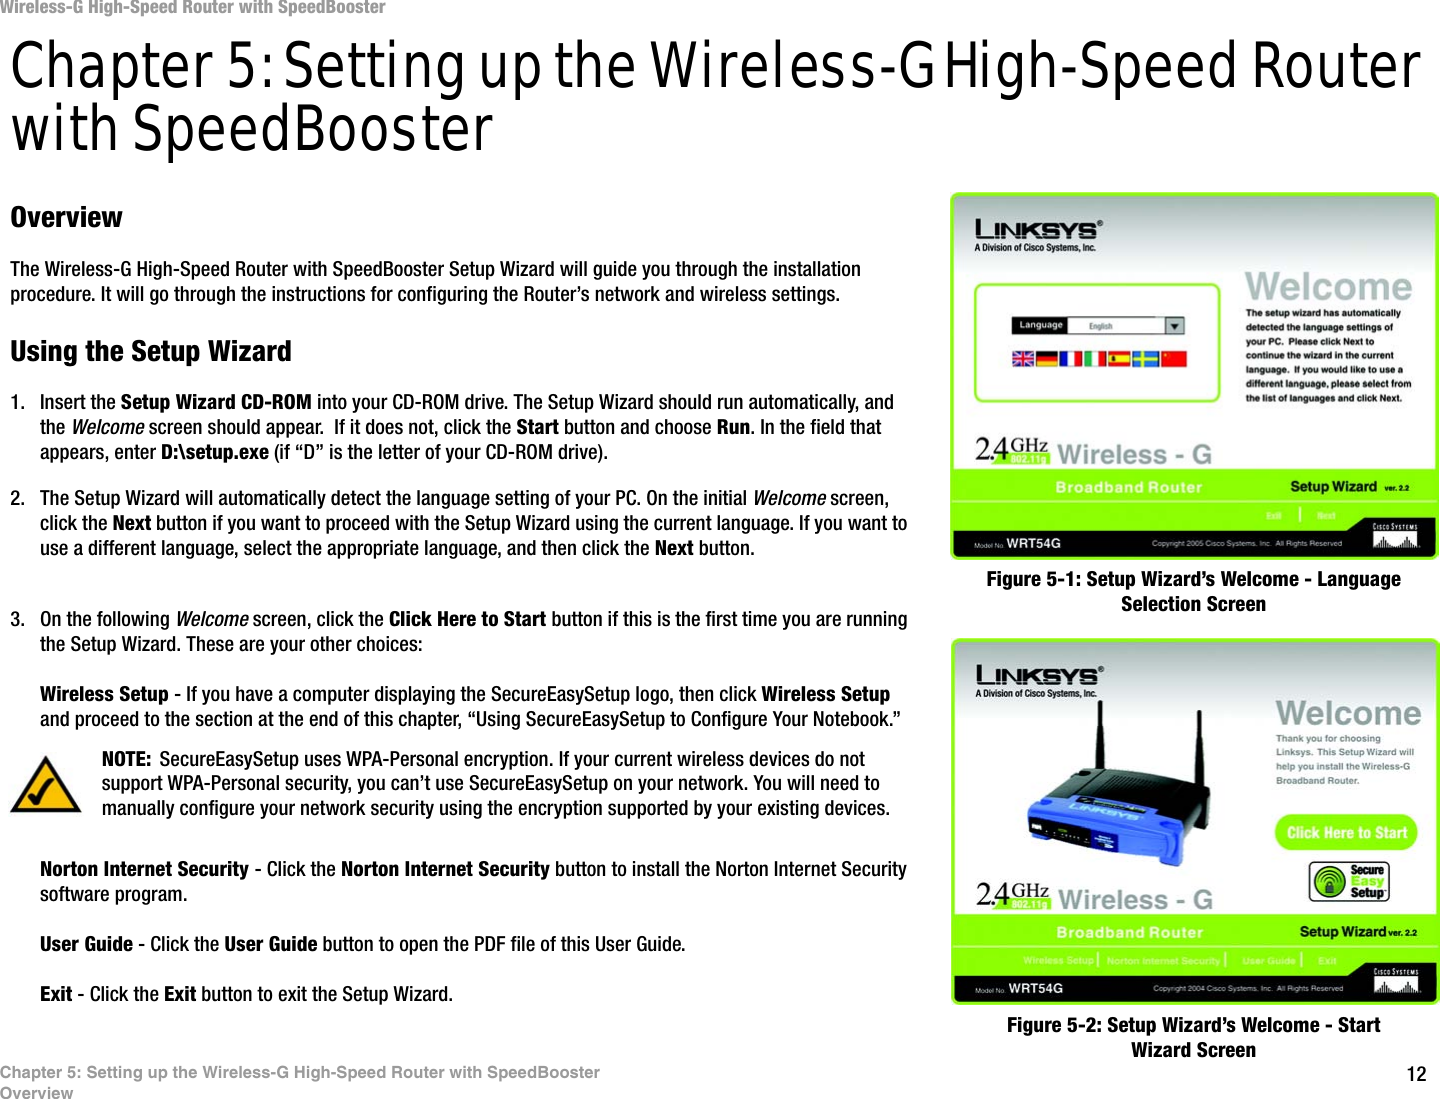 12Chapter 5: Setting up the Wireless-G High-Speed Router with SpeedBoosterOverviewWireless-G High-Speed Router with SpeedBoosterChapter 5: Setting up the Wireless-G High-Speed Router with SpeedBoosterOverviewThe Wireless-G High-Speed Router with SpeedBooster Setup Wizard will guide you through the installation procedure. It will go through the instructions for configuring the Router’s network and wireless settings.Using the Setup Wizard1. Insert the Setup Wizard CD-ROM into your CD-ROM drive. The Setup Wizard should run automatically, and the Welcome screen should appear.  If it does not, click the Start button and choose Run. In the field that appears, enter D:\setup.exe (if “D” is the letter of your CD-ROM drive).2. The Setup Wizard will automatically detect the language setting of your PC. On the initial Welcome screen, click the Next button if you want to proceed with the Setup Wizard using the current language. If you want to use a different language, select the appropriate language, and then click the Next button.3. On the following Welcome screen, click the Click Here to Start button if this is the first time you are running the Setup Wizard. These are your other choices:Wireless Setup - If you have a computer displaying the SecureEasySetup logo, then click Wireless Setup and proceed to the section at the end of this chapter, “Using SecureEasySetup to Configure Your Notebook.”Norton Internet Security - Click the Norton Internet Security button to install the Norton Internet Security software program. User Guide - Click the User Guide button to open the PDF file of this User Guide.Exit - Click the Exit button to exit the Setup Wizard.Figure 5-1: Setup Wizard’s Welcome - Language Selection ScreenFigure 5-2: Setup Wizard’s Welcome - Start Wizard ScreenNOTE: SecureEasySetup uses WPA-Personal encryption. If your current wireless devices do not support WPA-Personal security, you can’t use SecureEasySetup on your network. You will need to manually configure your network security using the encryption supported by your existing devices.